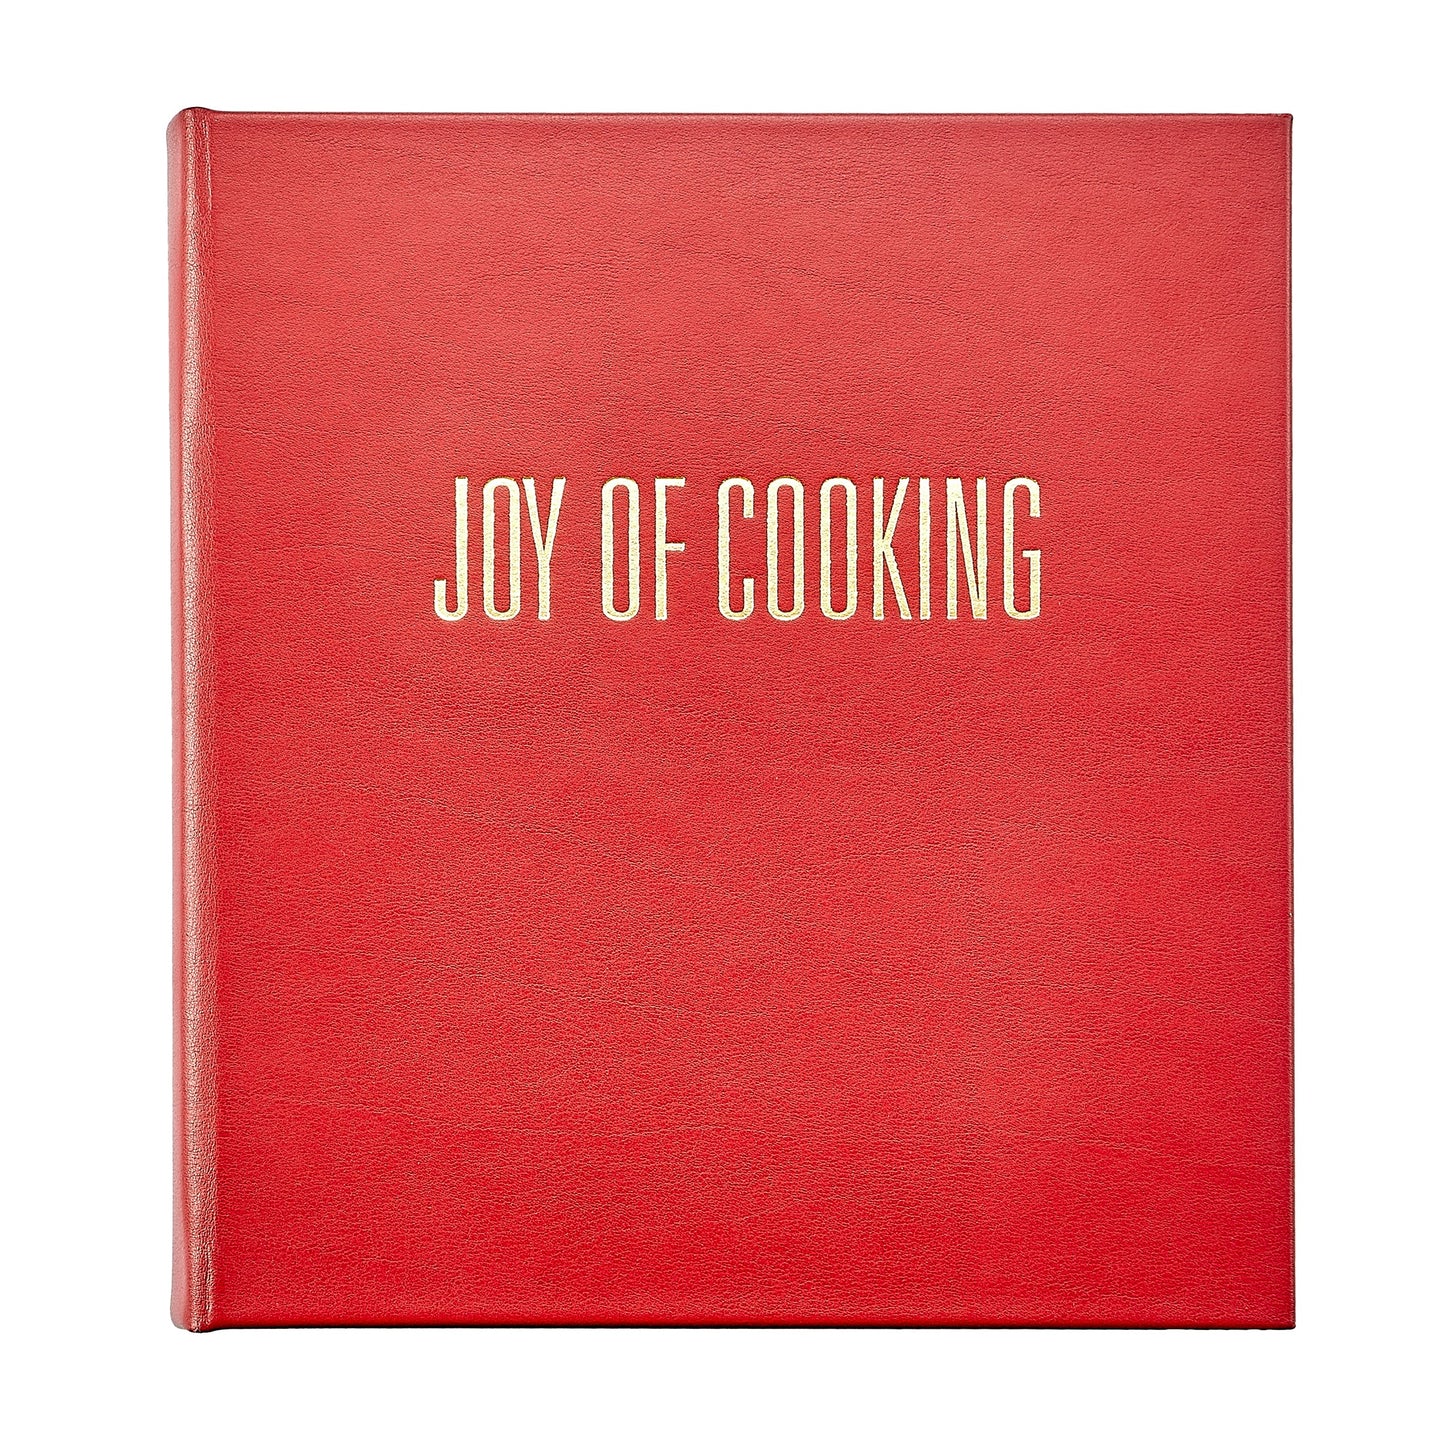 Joy of Cooking, Leather Bound